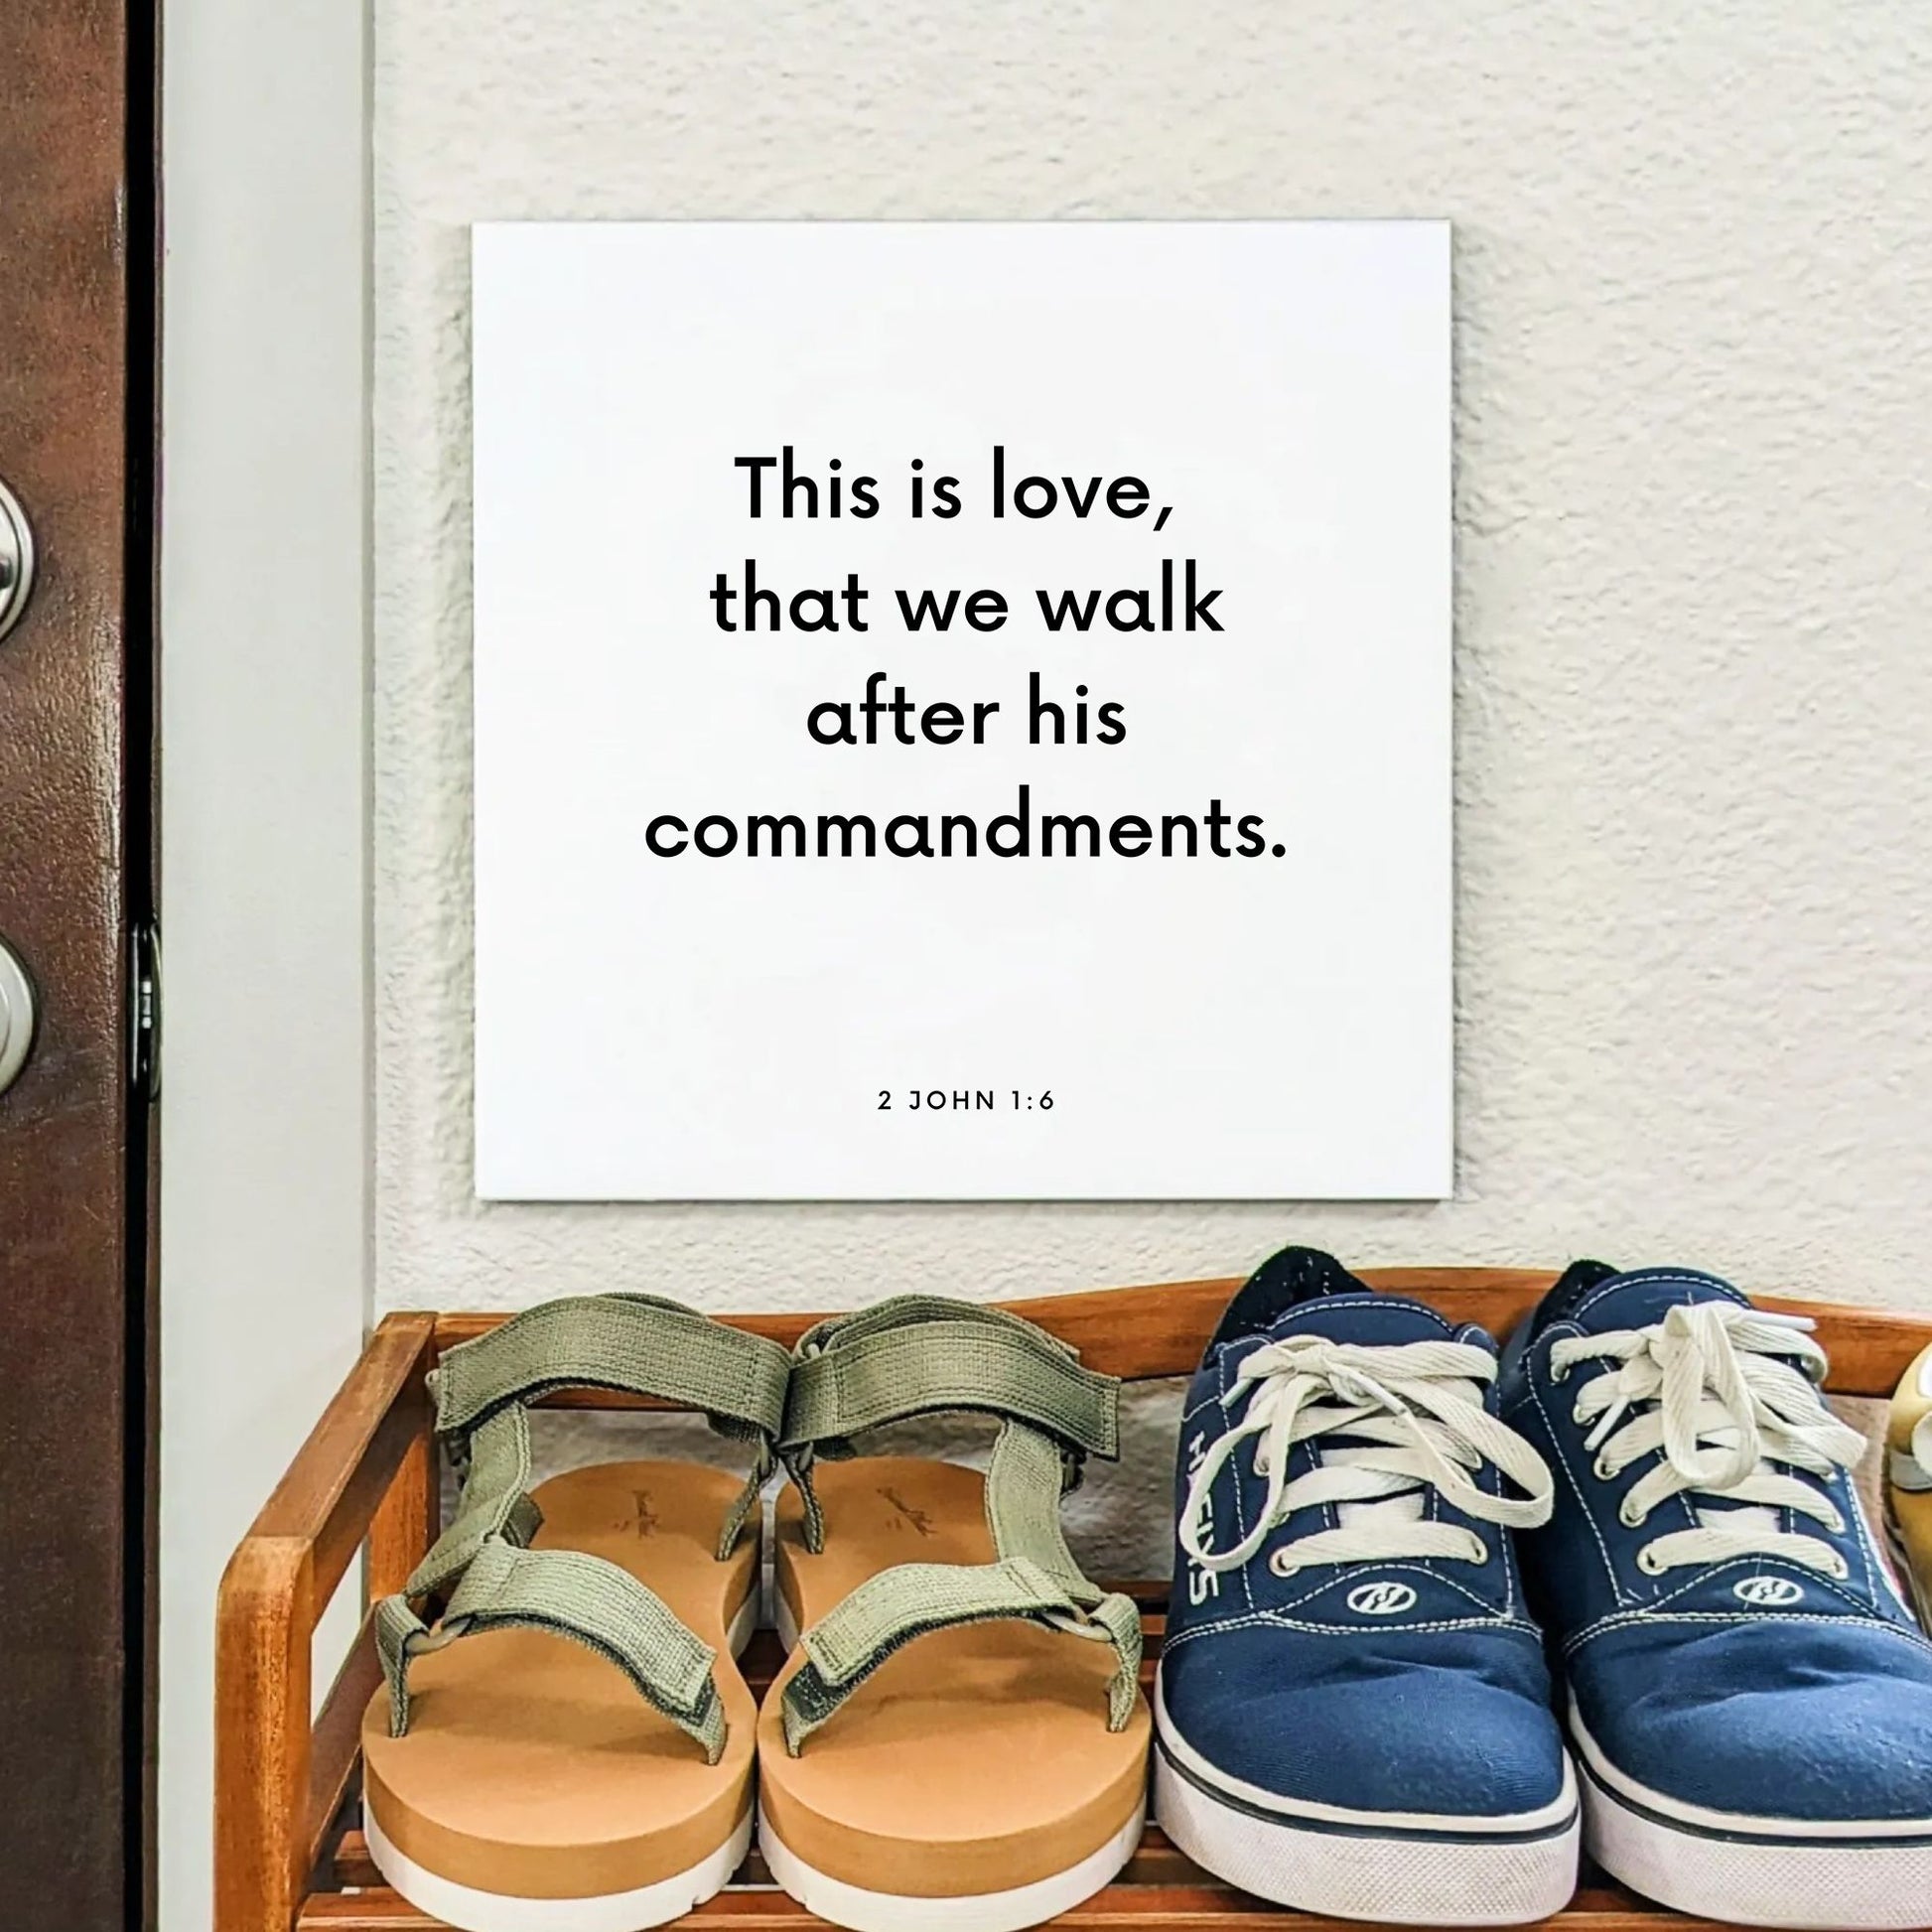 Shoes mouting of the scripture tile for 2 John 1:6 - "This is love, that we walk after his commandments"